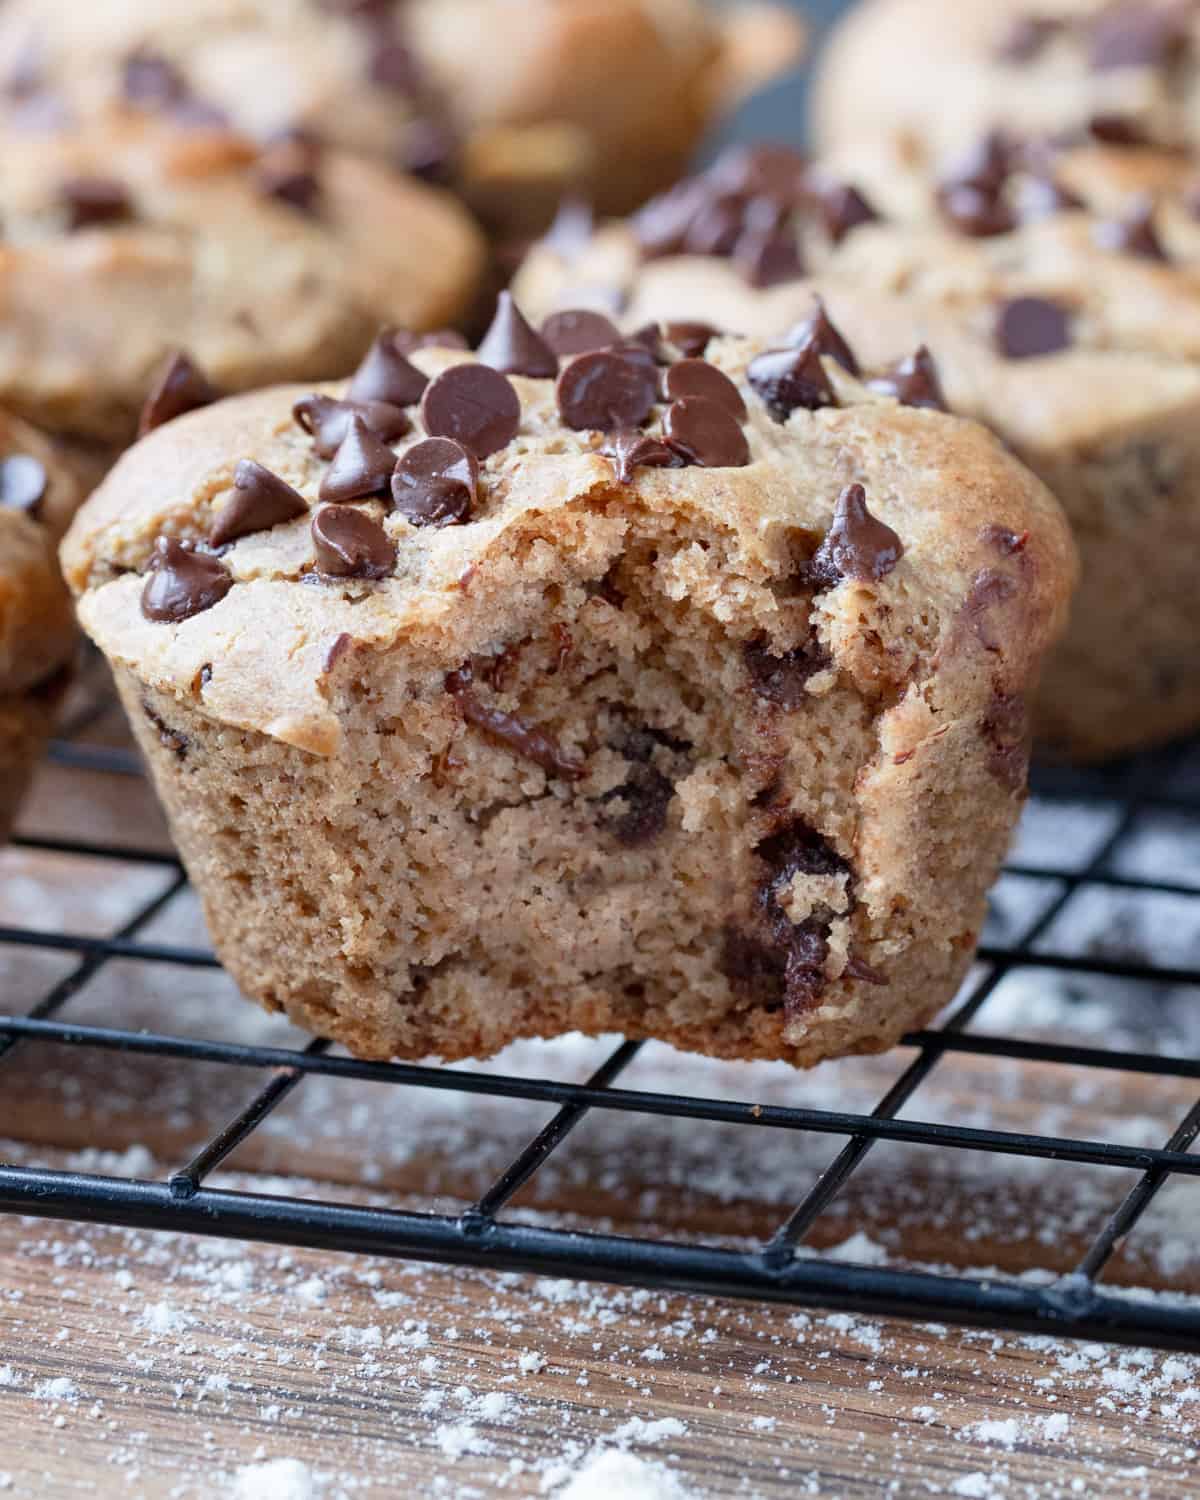 A close-up of a gluten-free chocolate chip muffin with a section removed, showing the dense and moist crumb texture with chocolate chips.